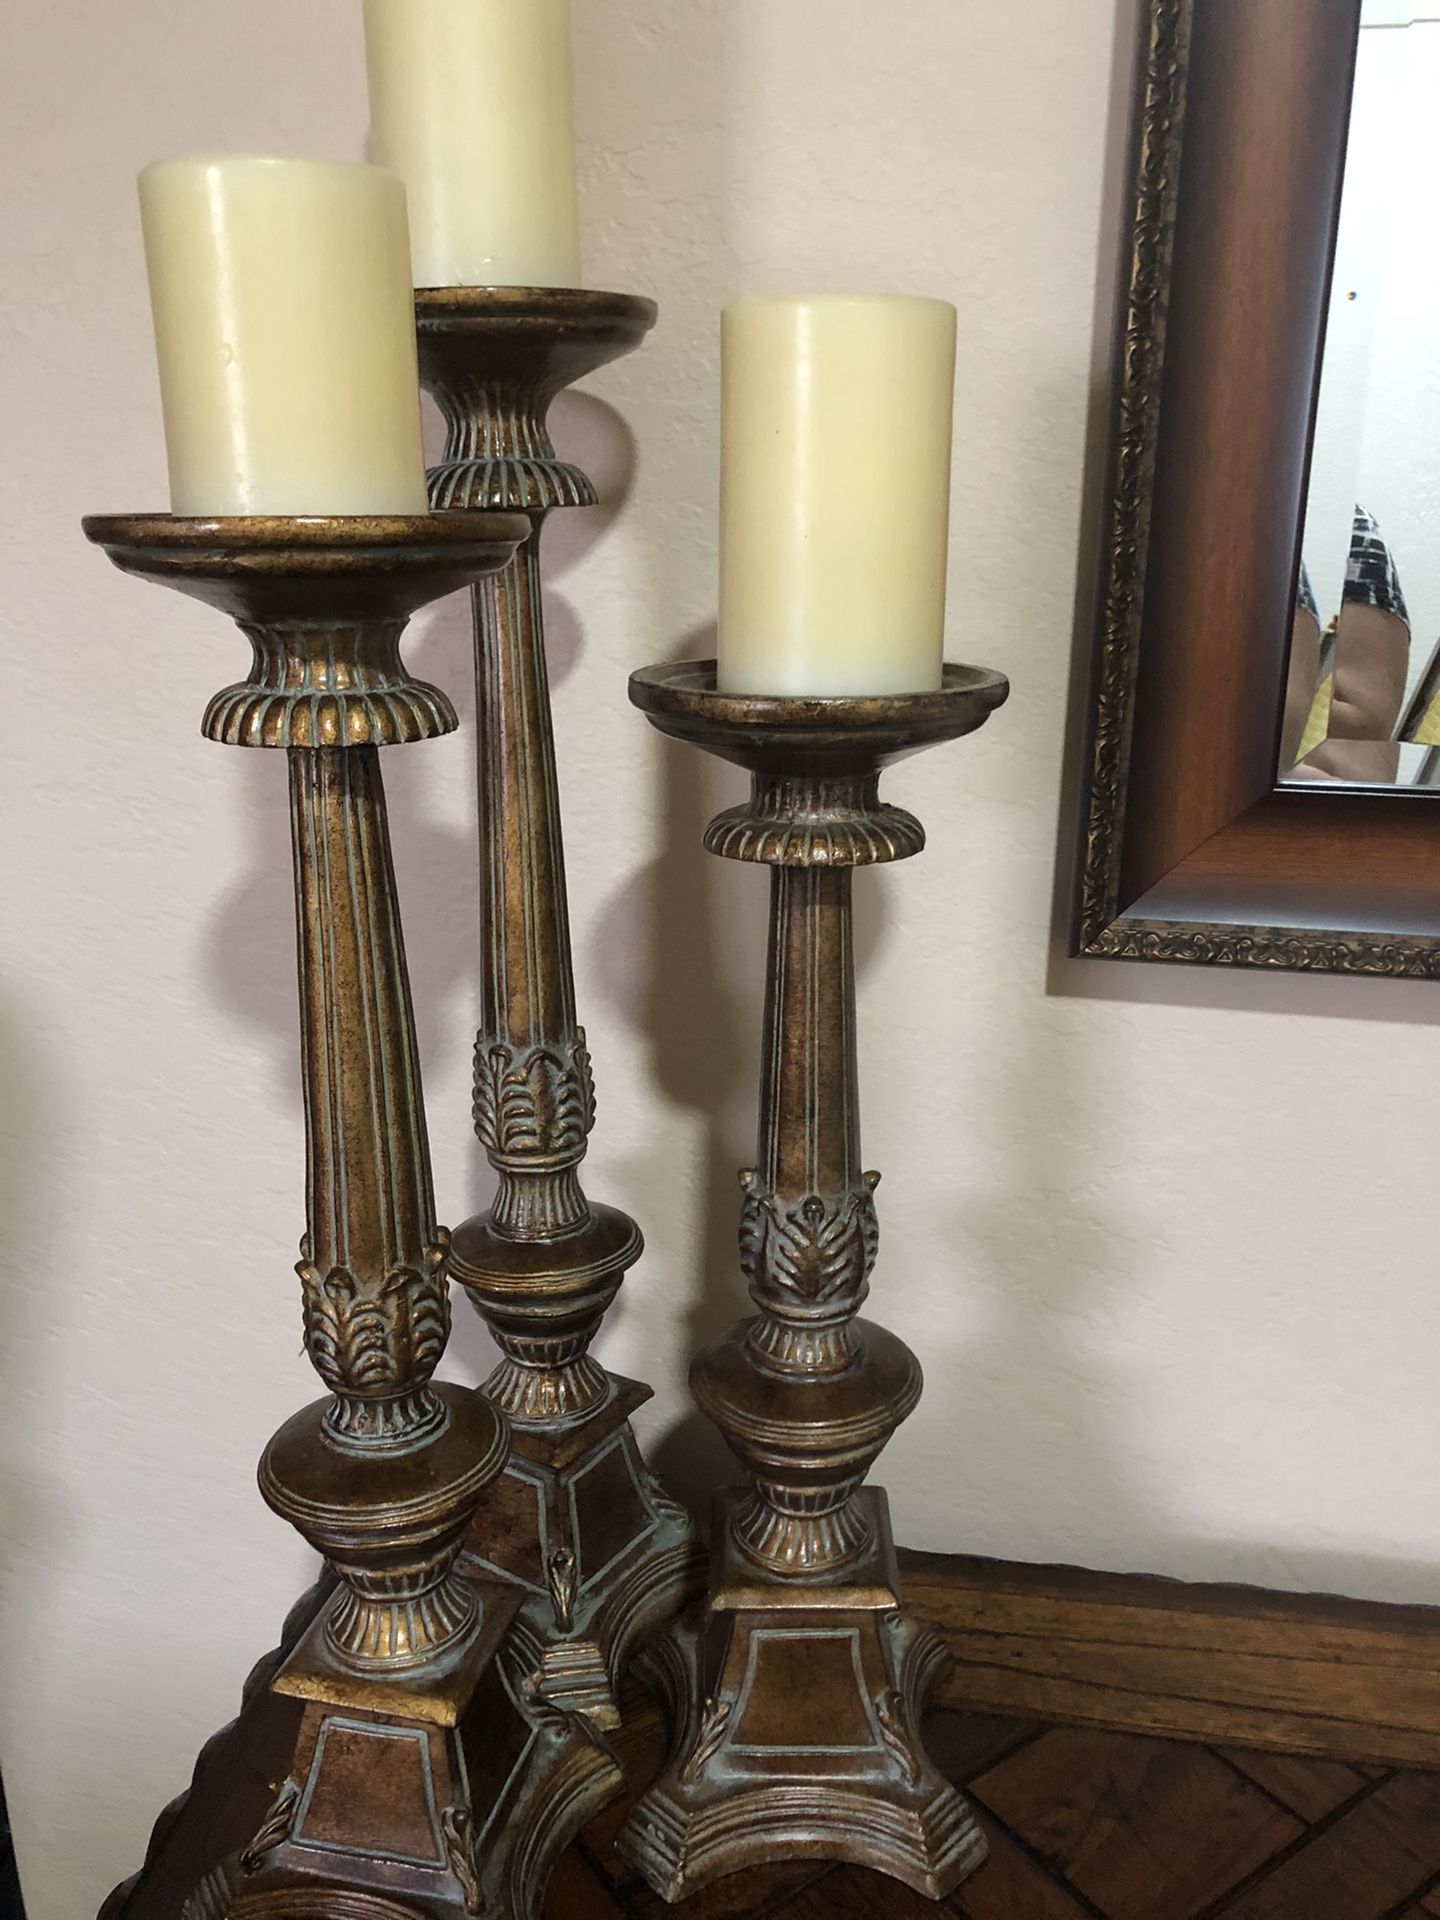 Pillar Candle Set & Wall Accents